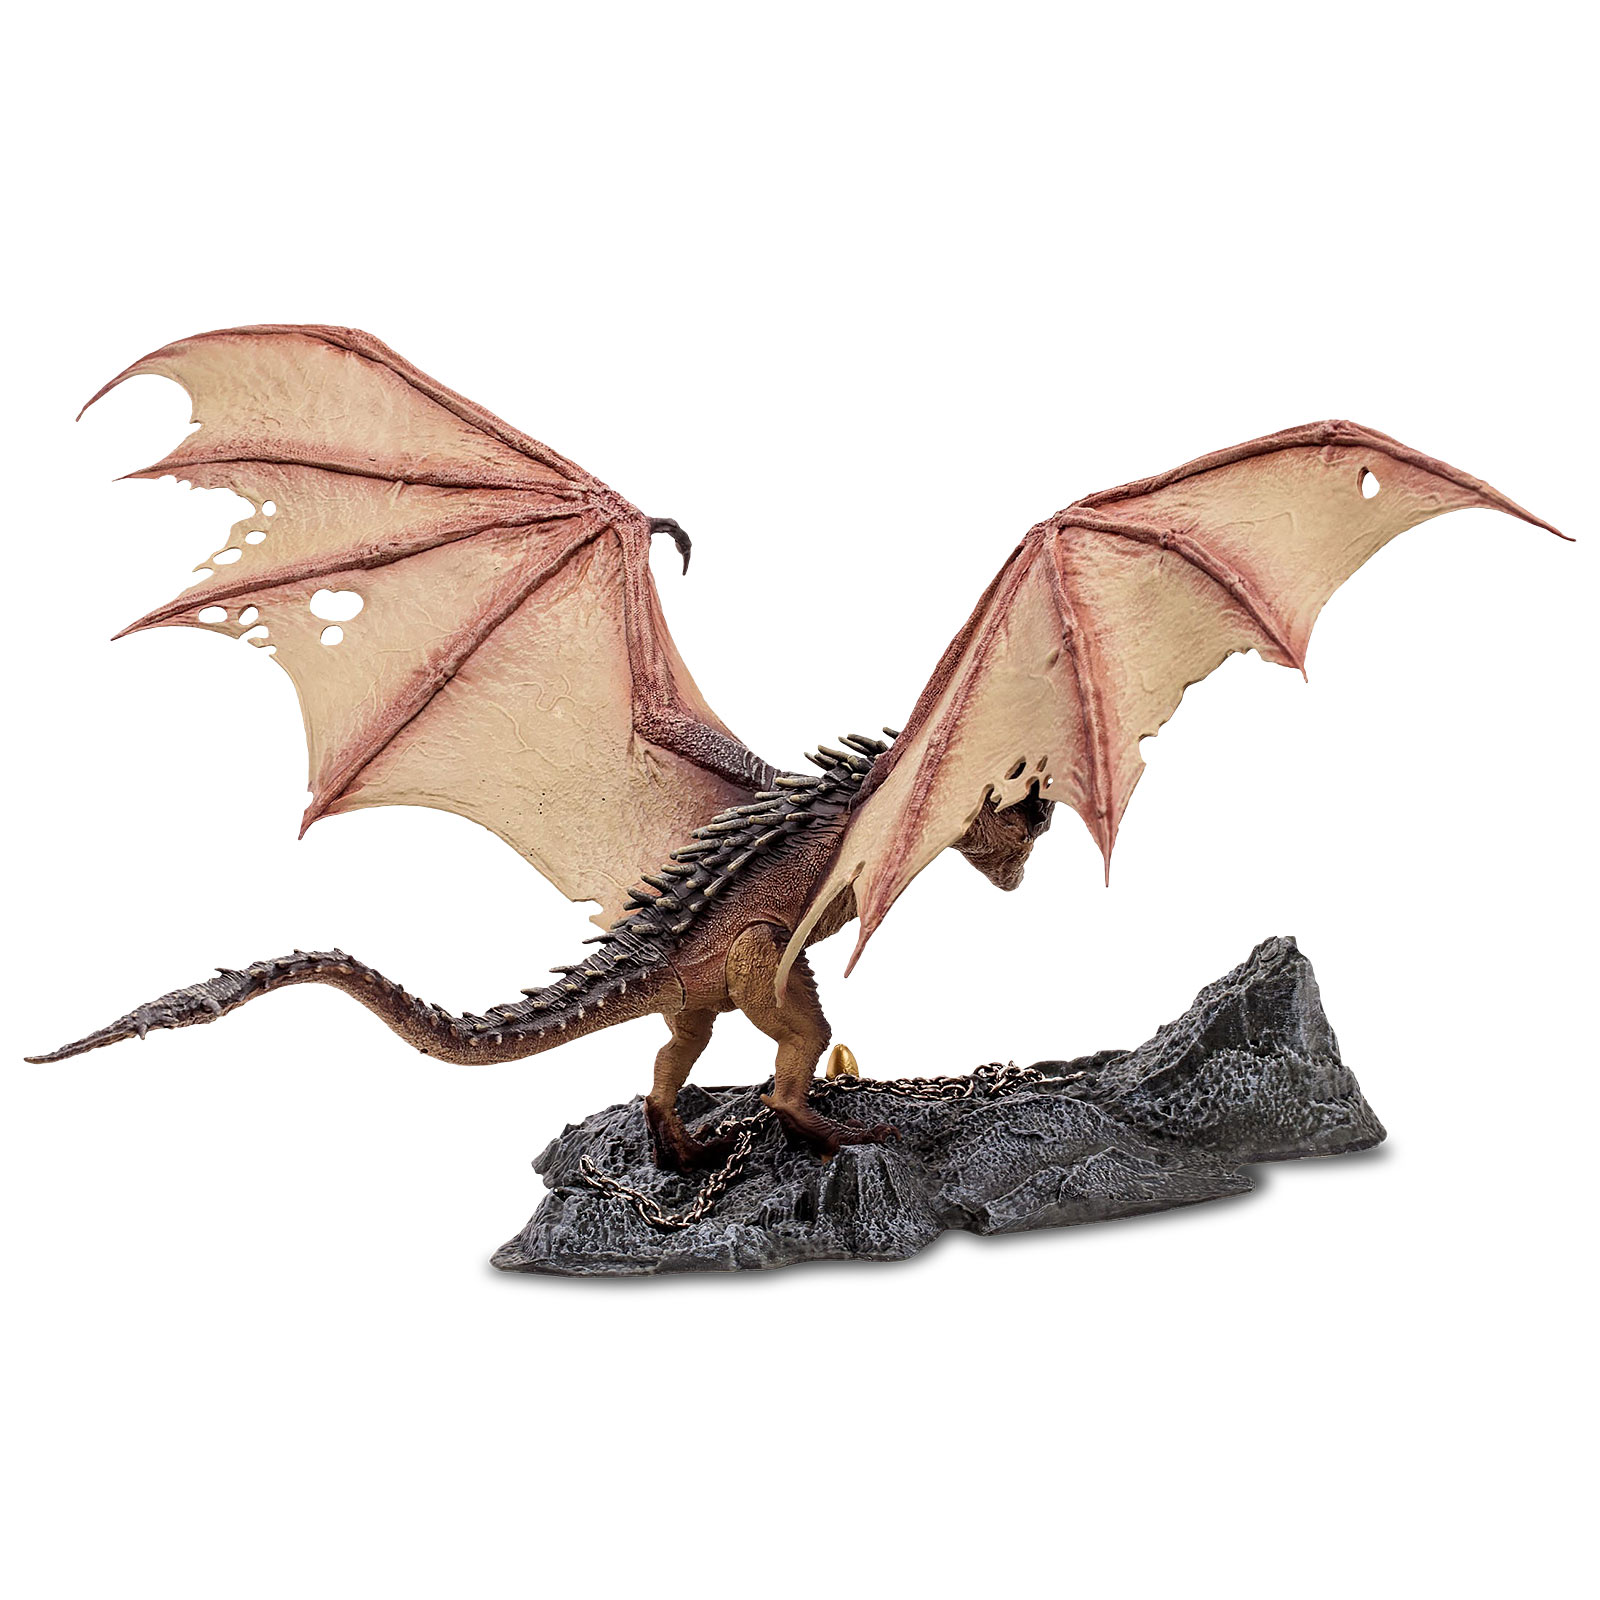 Harry Potter - Hungarian Horntail Figure